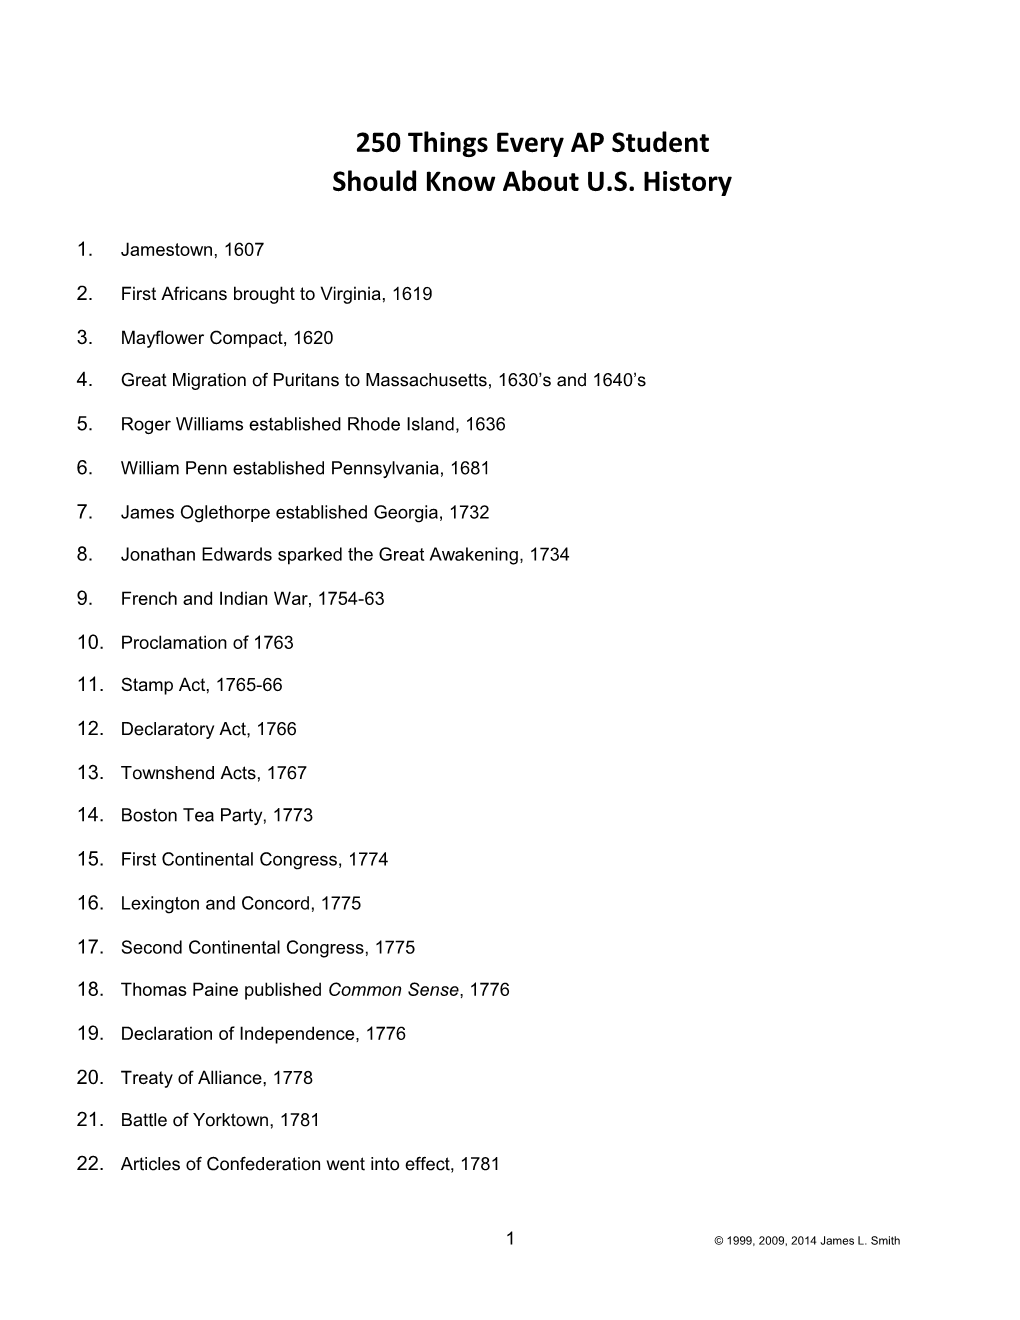 Should Know About U.S. History